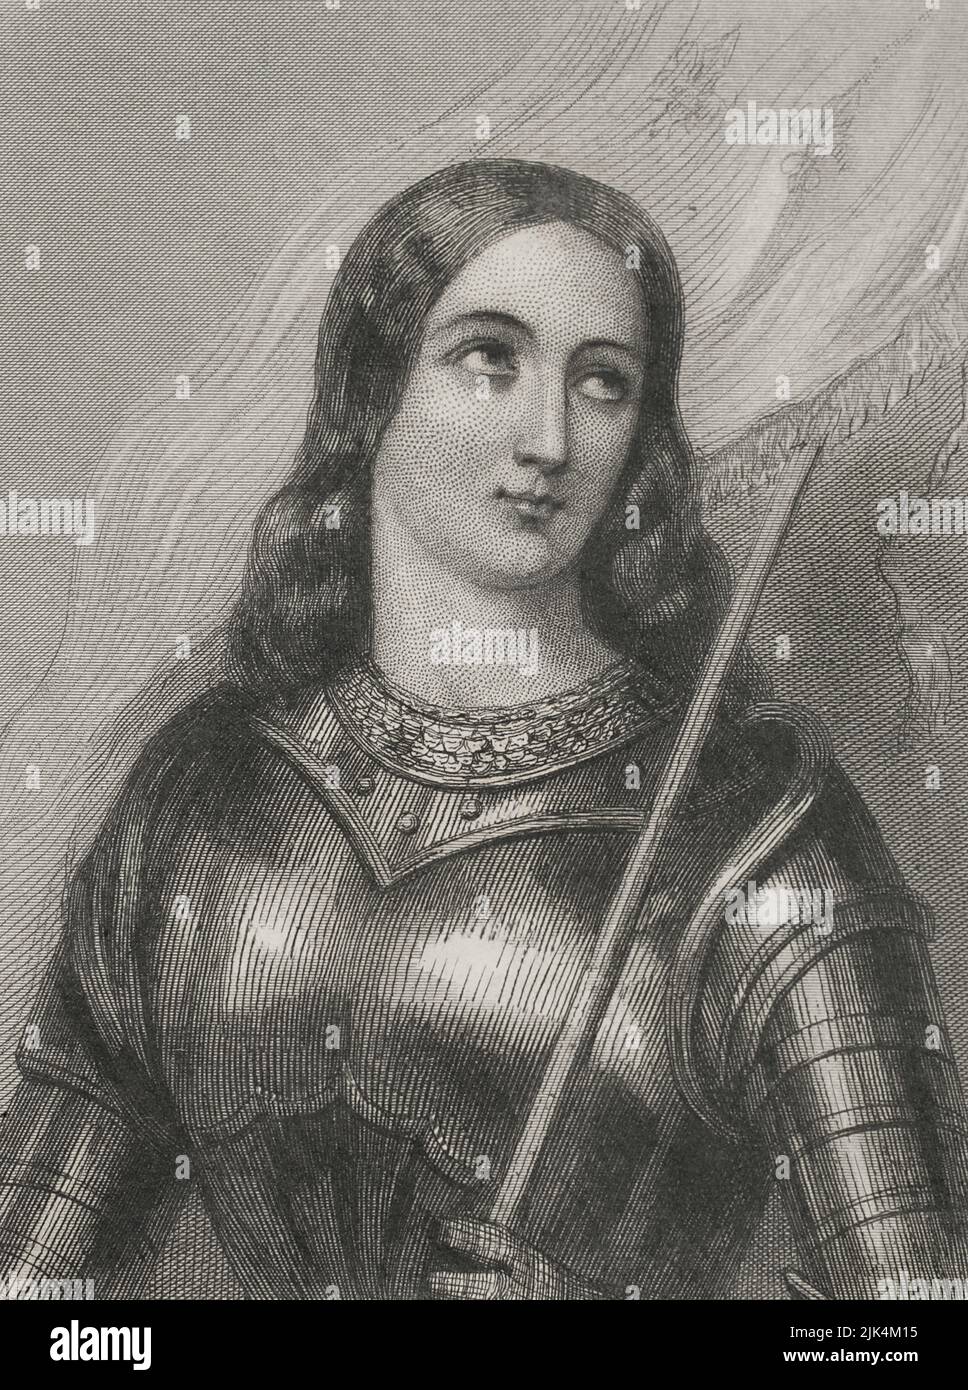 Saint Joan of Arc (1412-1431), so-called the Maid of Orleans. French heroine. Beatified in 1909 and canonized in 1920. Portrait. Engraving by Geoffroy. 'Historia Universal', by César Cantú. Volume IV, 1856. Stock Photo